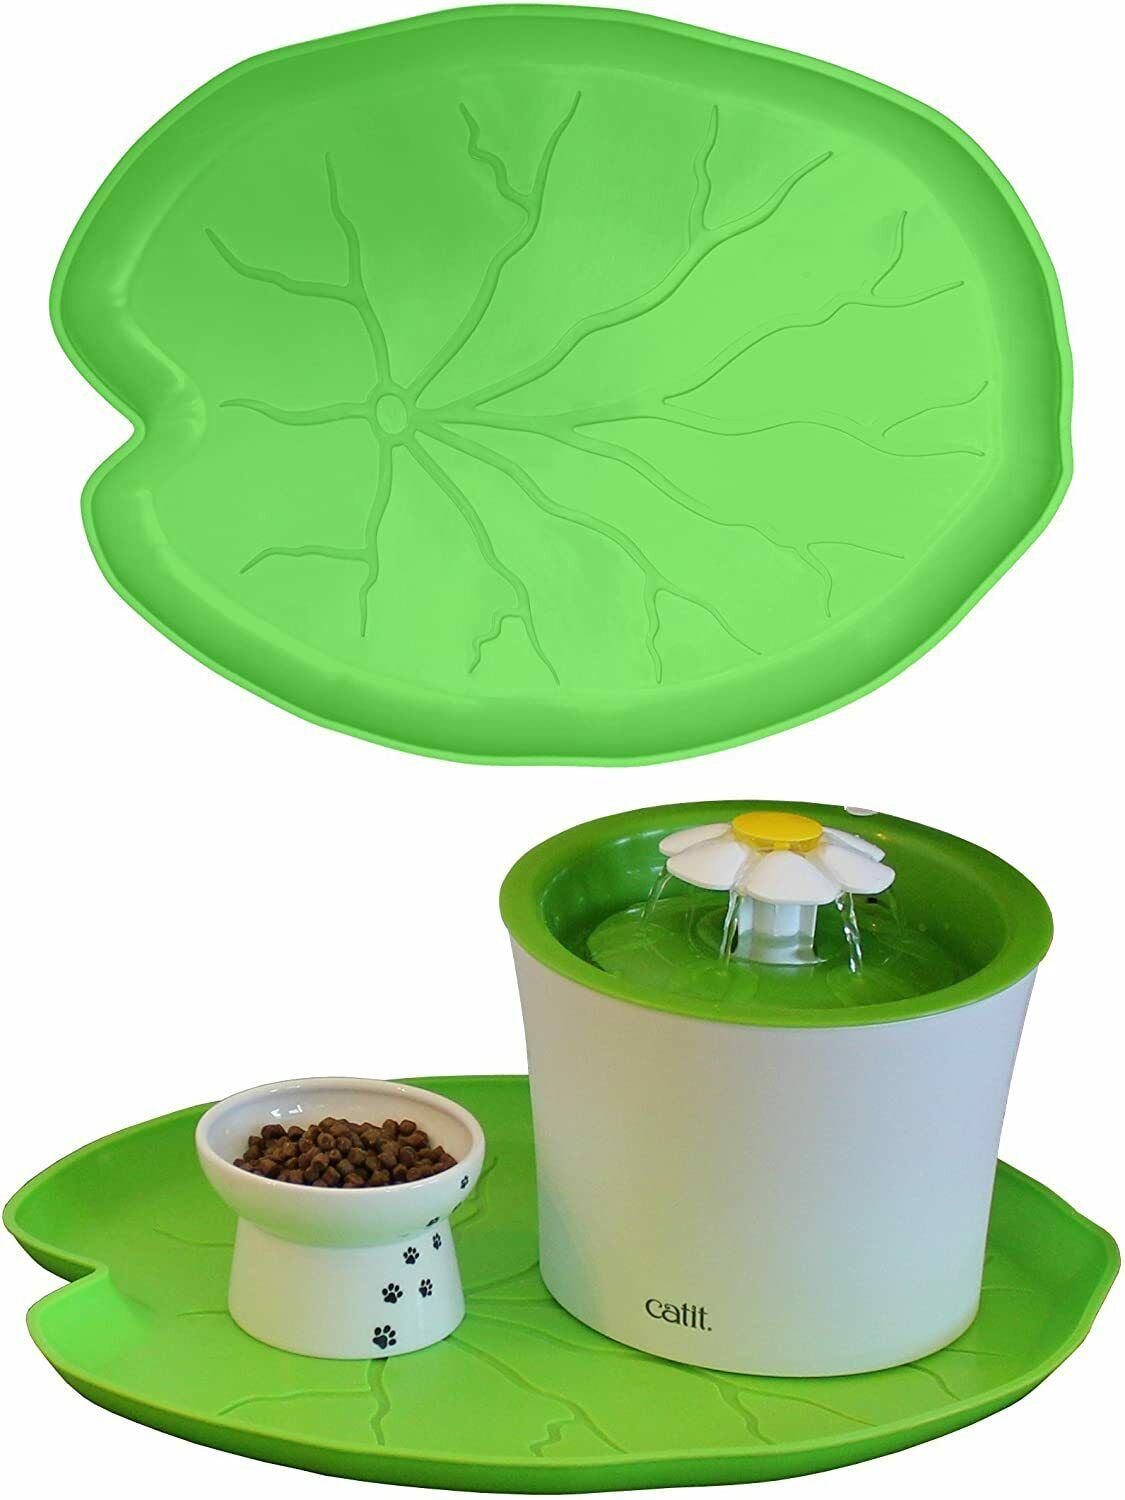 Premium Pet Food Tray - Dog and Cat Food Mat with Green Leaf Design